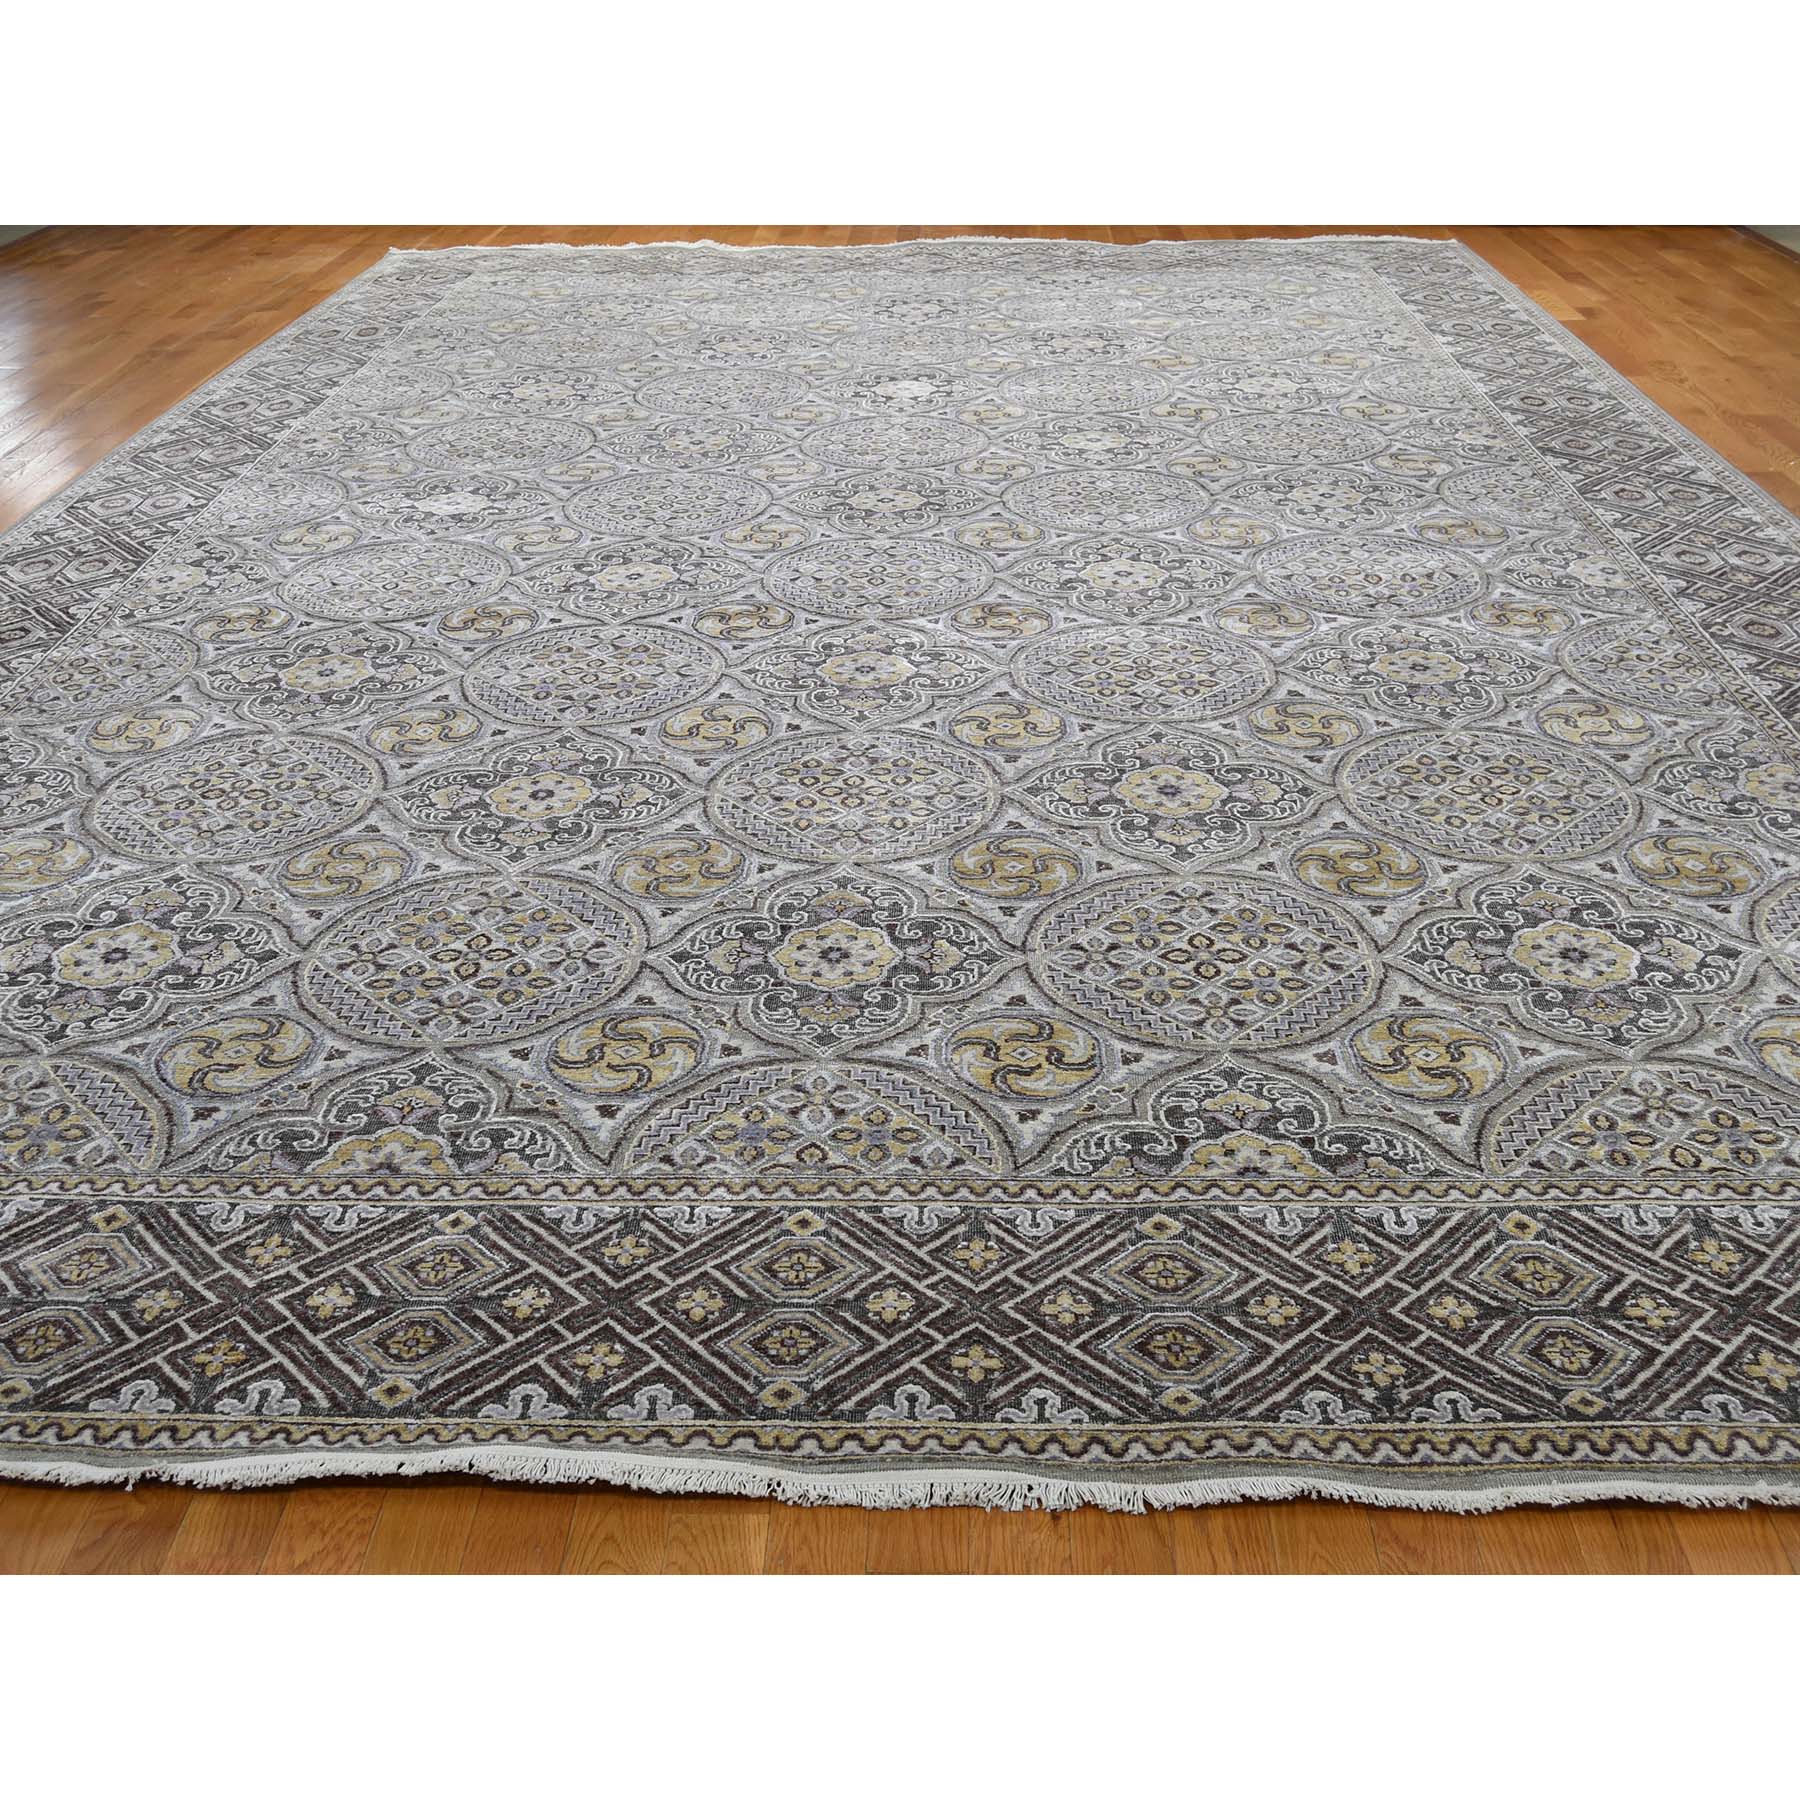 12'x18'6" Mughal Inspired Medallions Design Textured Wool and Silk Oversize Hand Woven Oriental Rug 